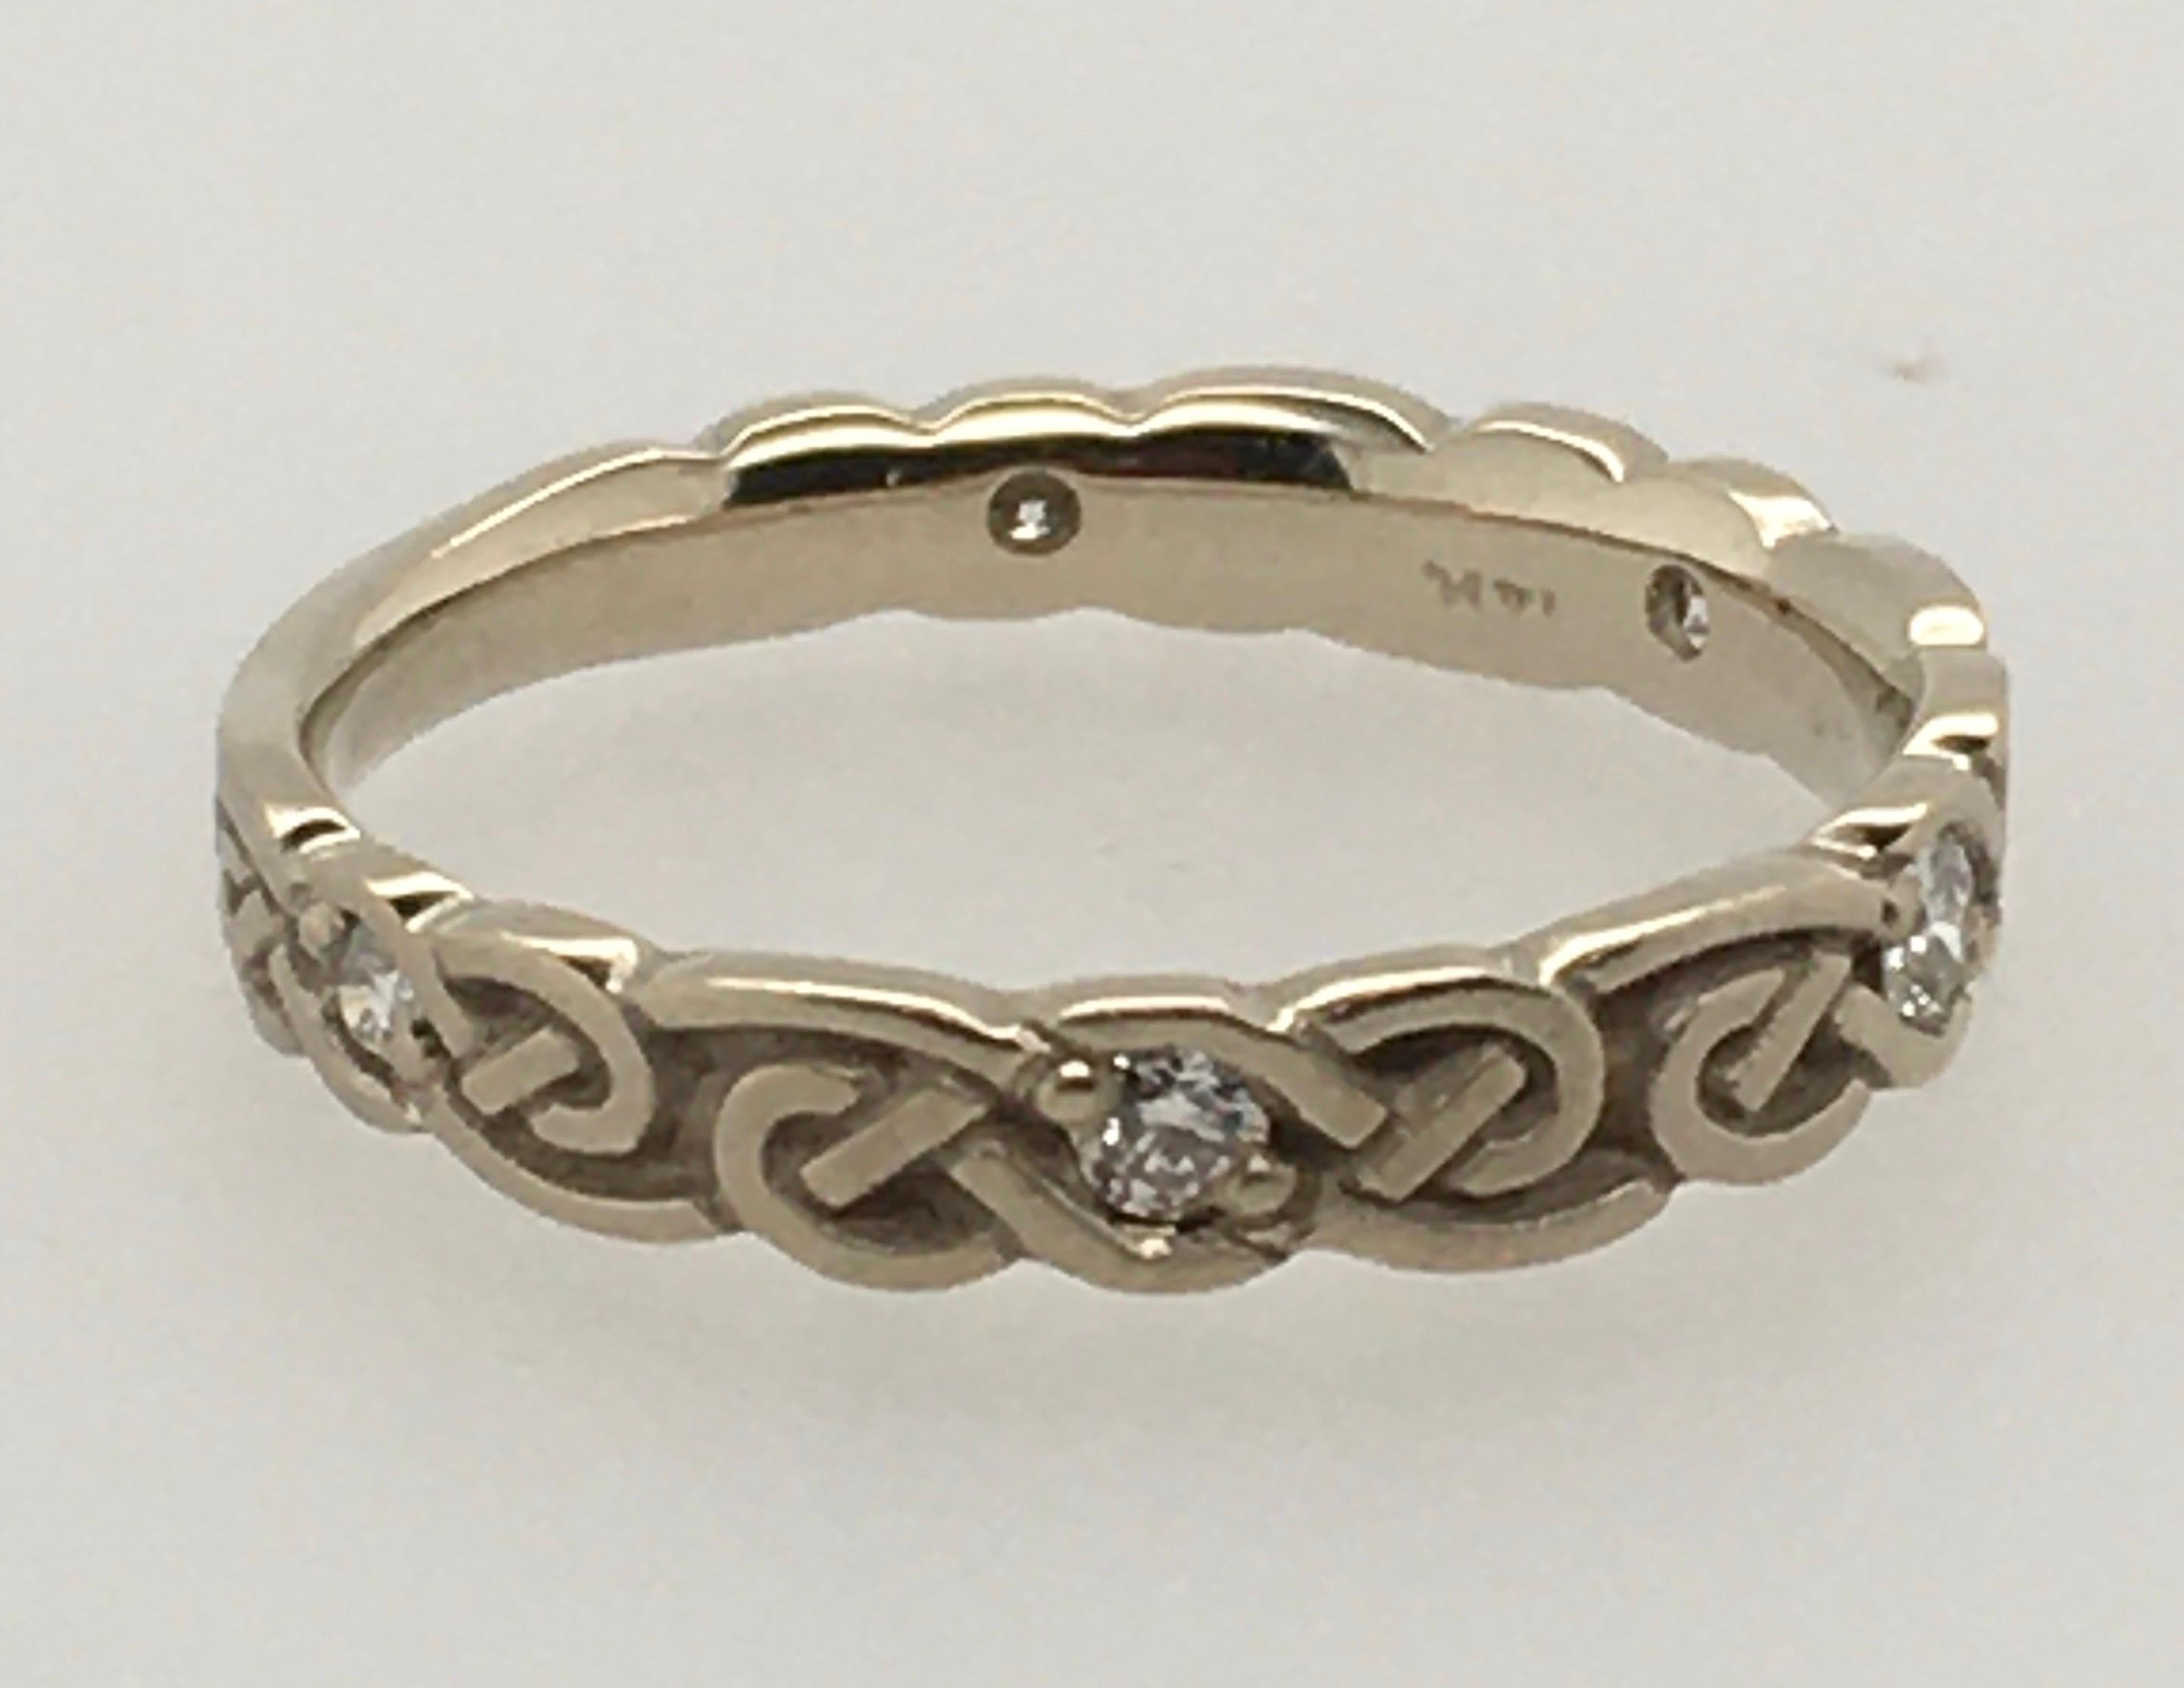 STUDIO 311 Narrow Infinity Knot with Scattered Diamond Design in White Gold Band In Excellent Condition For Sale In Kennebunkport, ME